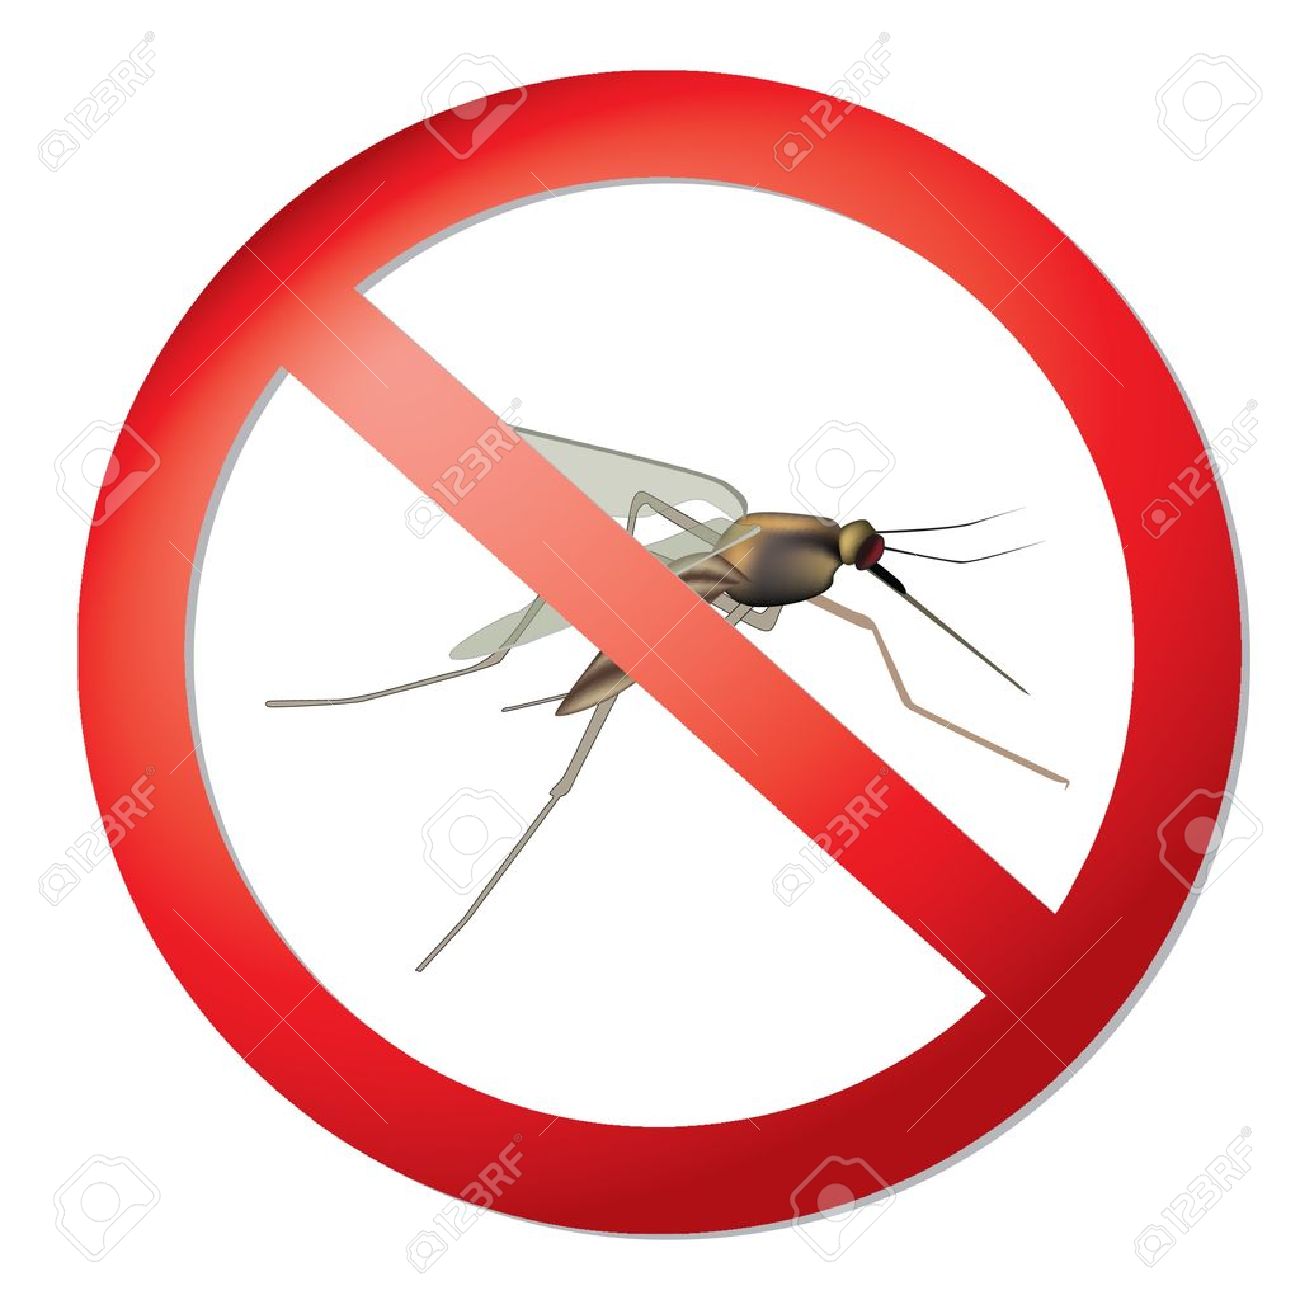 Dipterous Fly Stock Photos & Pictures. 99 Royalty Free Dipterous.